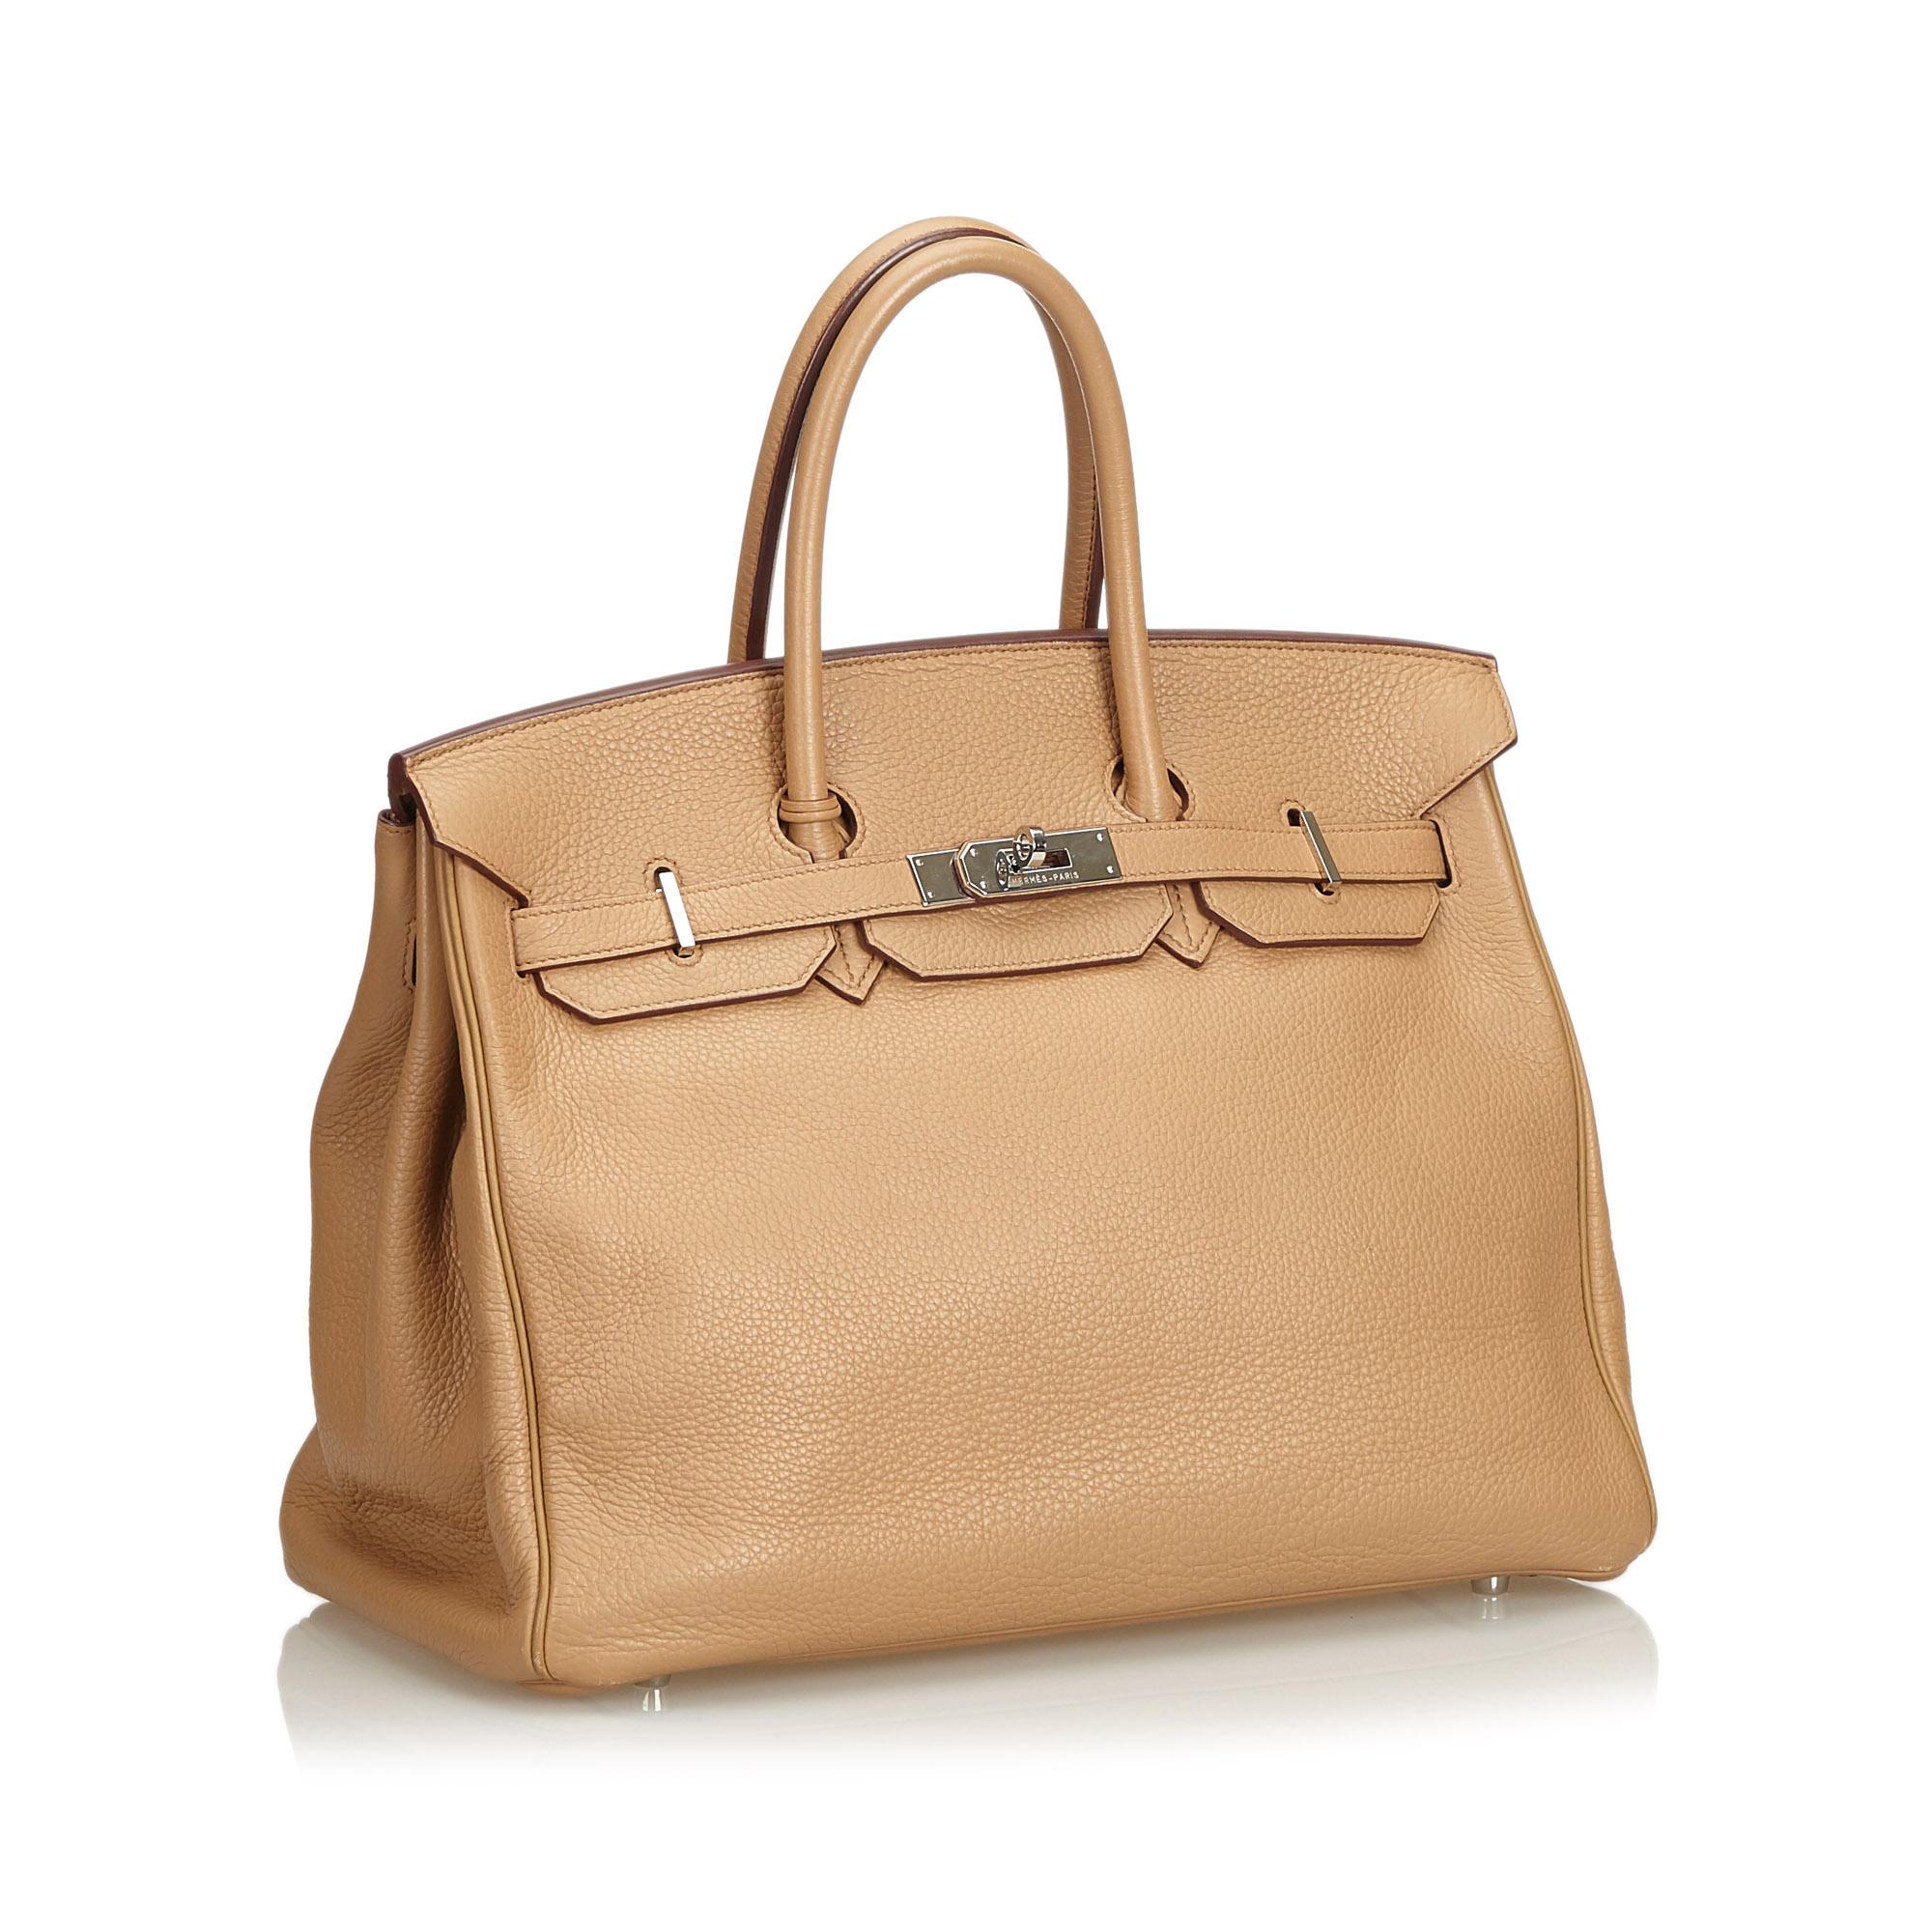 Hermes Clemence Birkin 35

The Birkin 35 features a Clemence leather body, rolled leather handles, front flap with turn-lock closure, gold hardware, leather lining, and interior open and zip pockets. It comes with a clochette, lock, and key.

Please